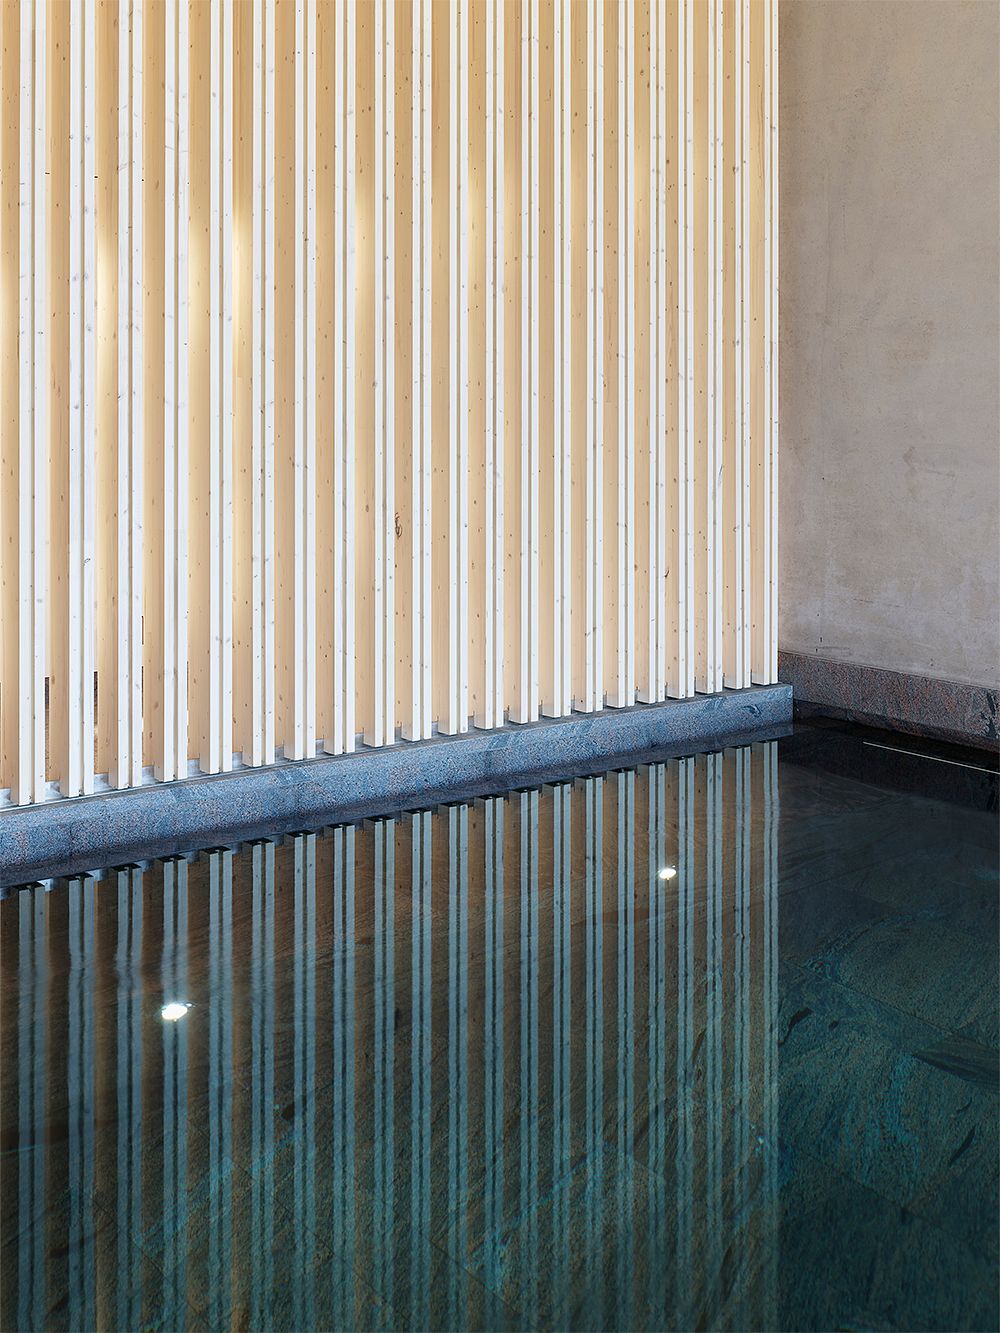 An image of Andrum spa's interior: a stone pool and wooden walls.